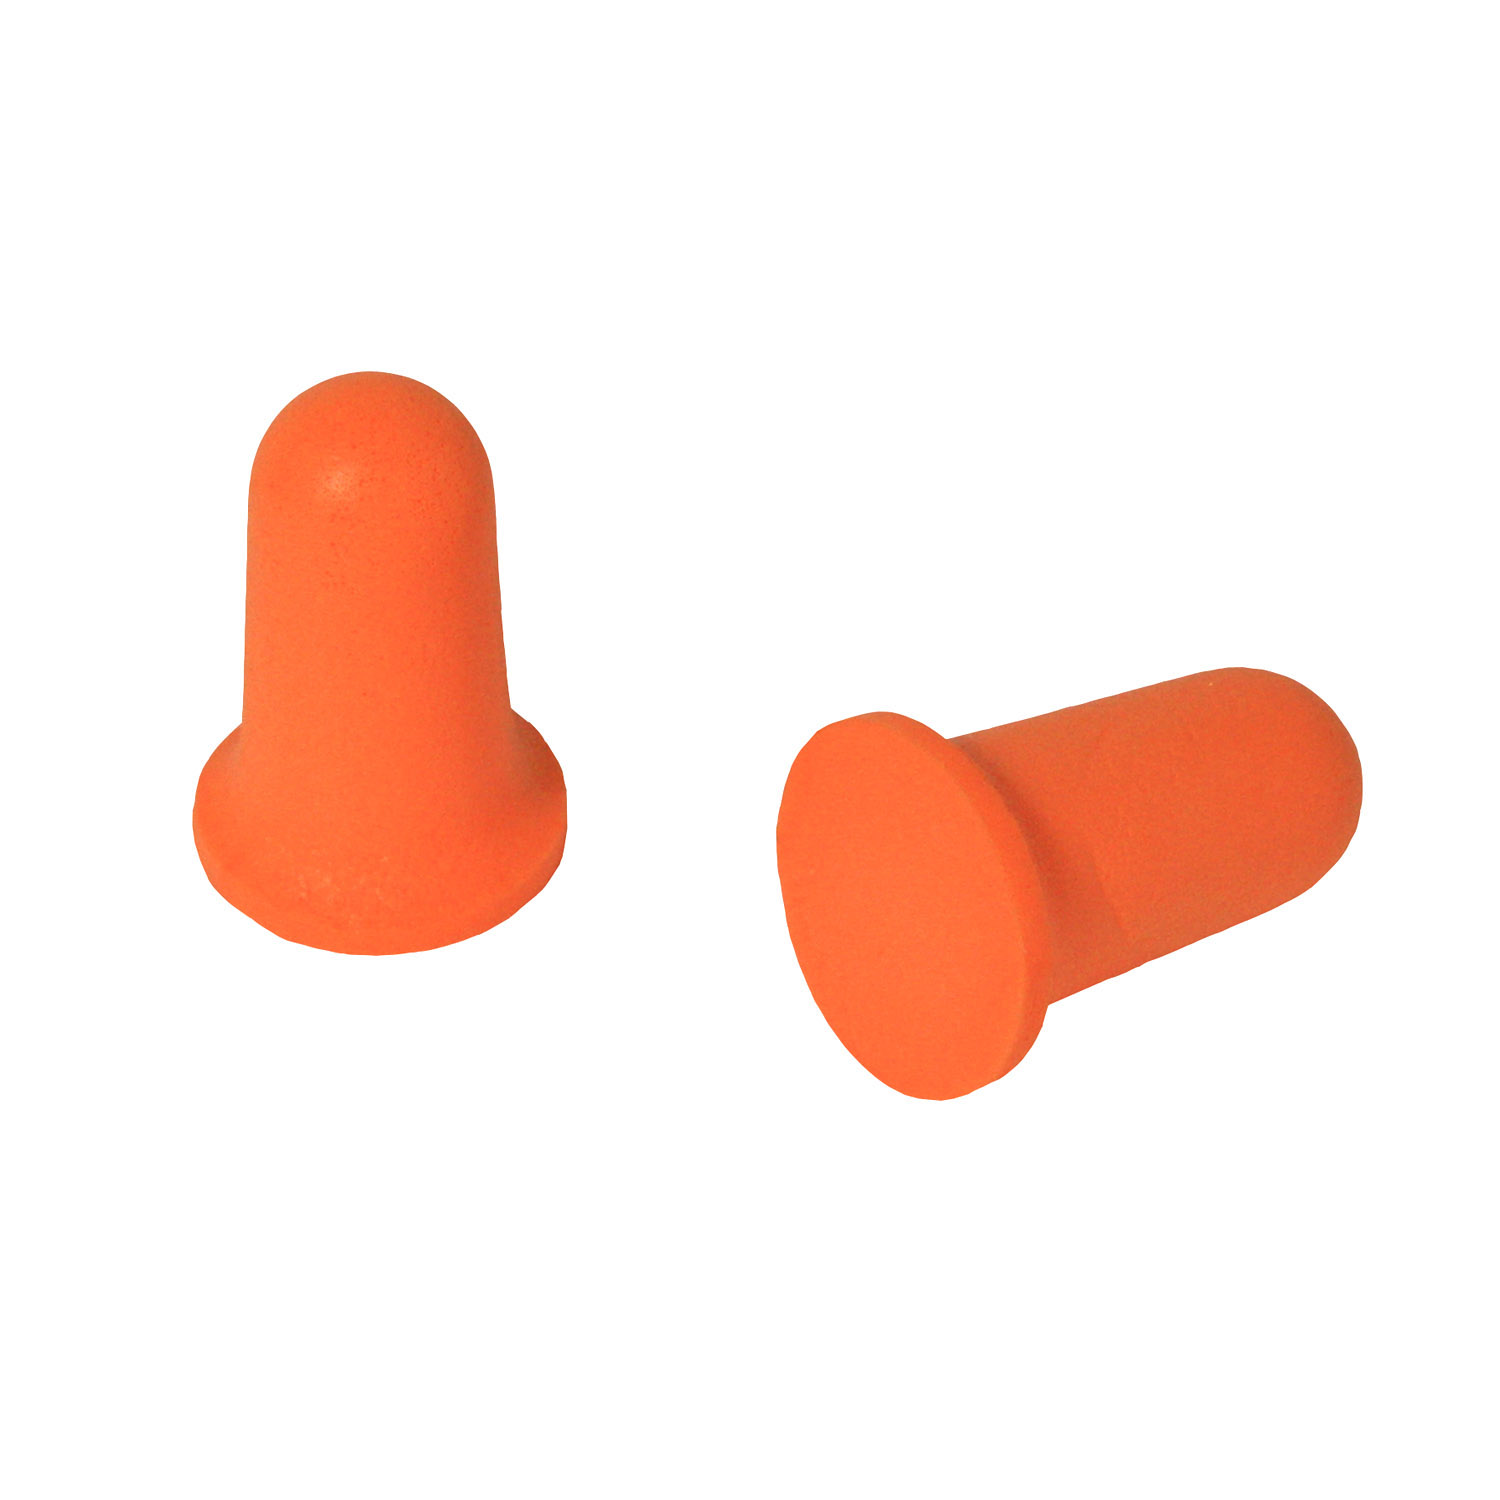 DPG63 Bell Shape Disposable Foam Earplugs - Uncorded - Blister Pack of 5 Pair with Carry Case